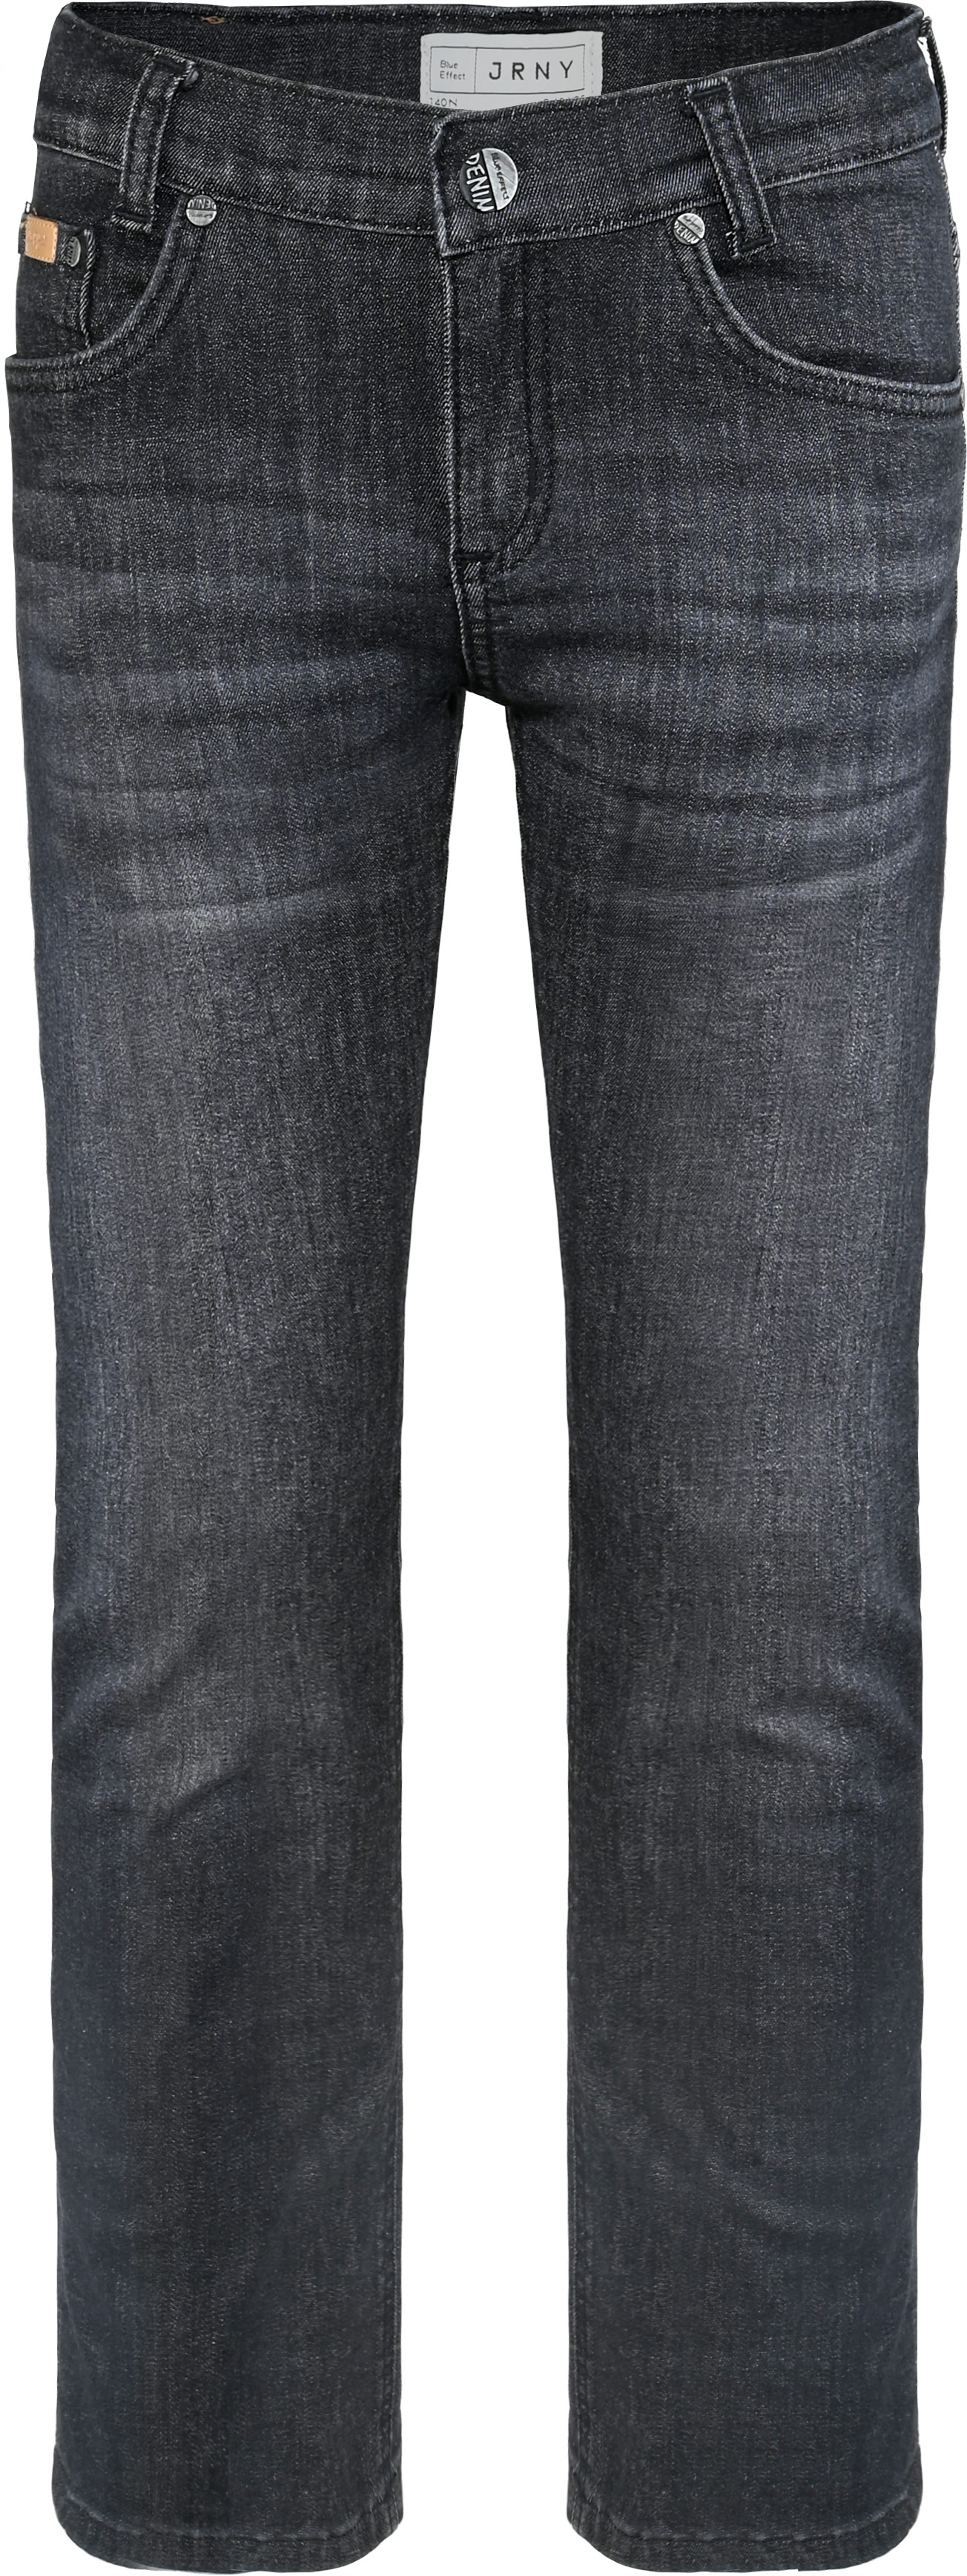 2833-JRNY Boys Relaxed Jeans verfügbar in Slim,Normal,Wide